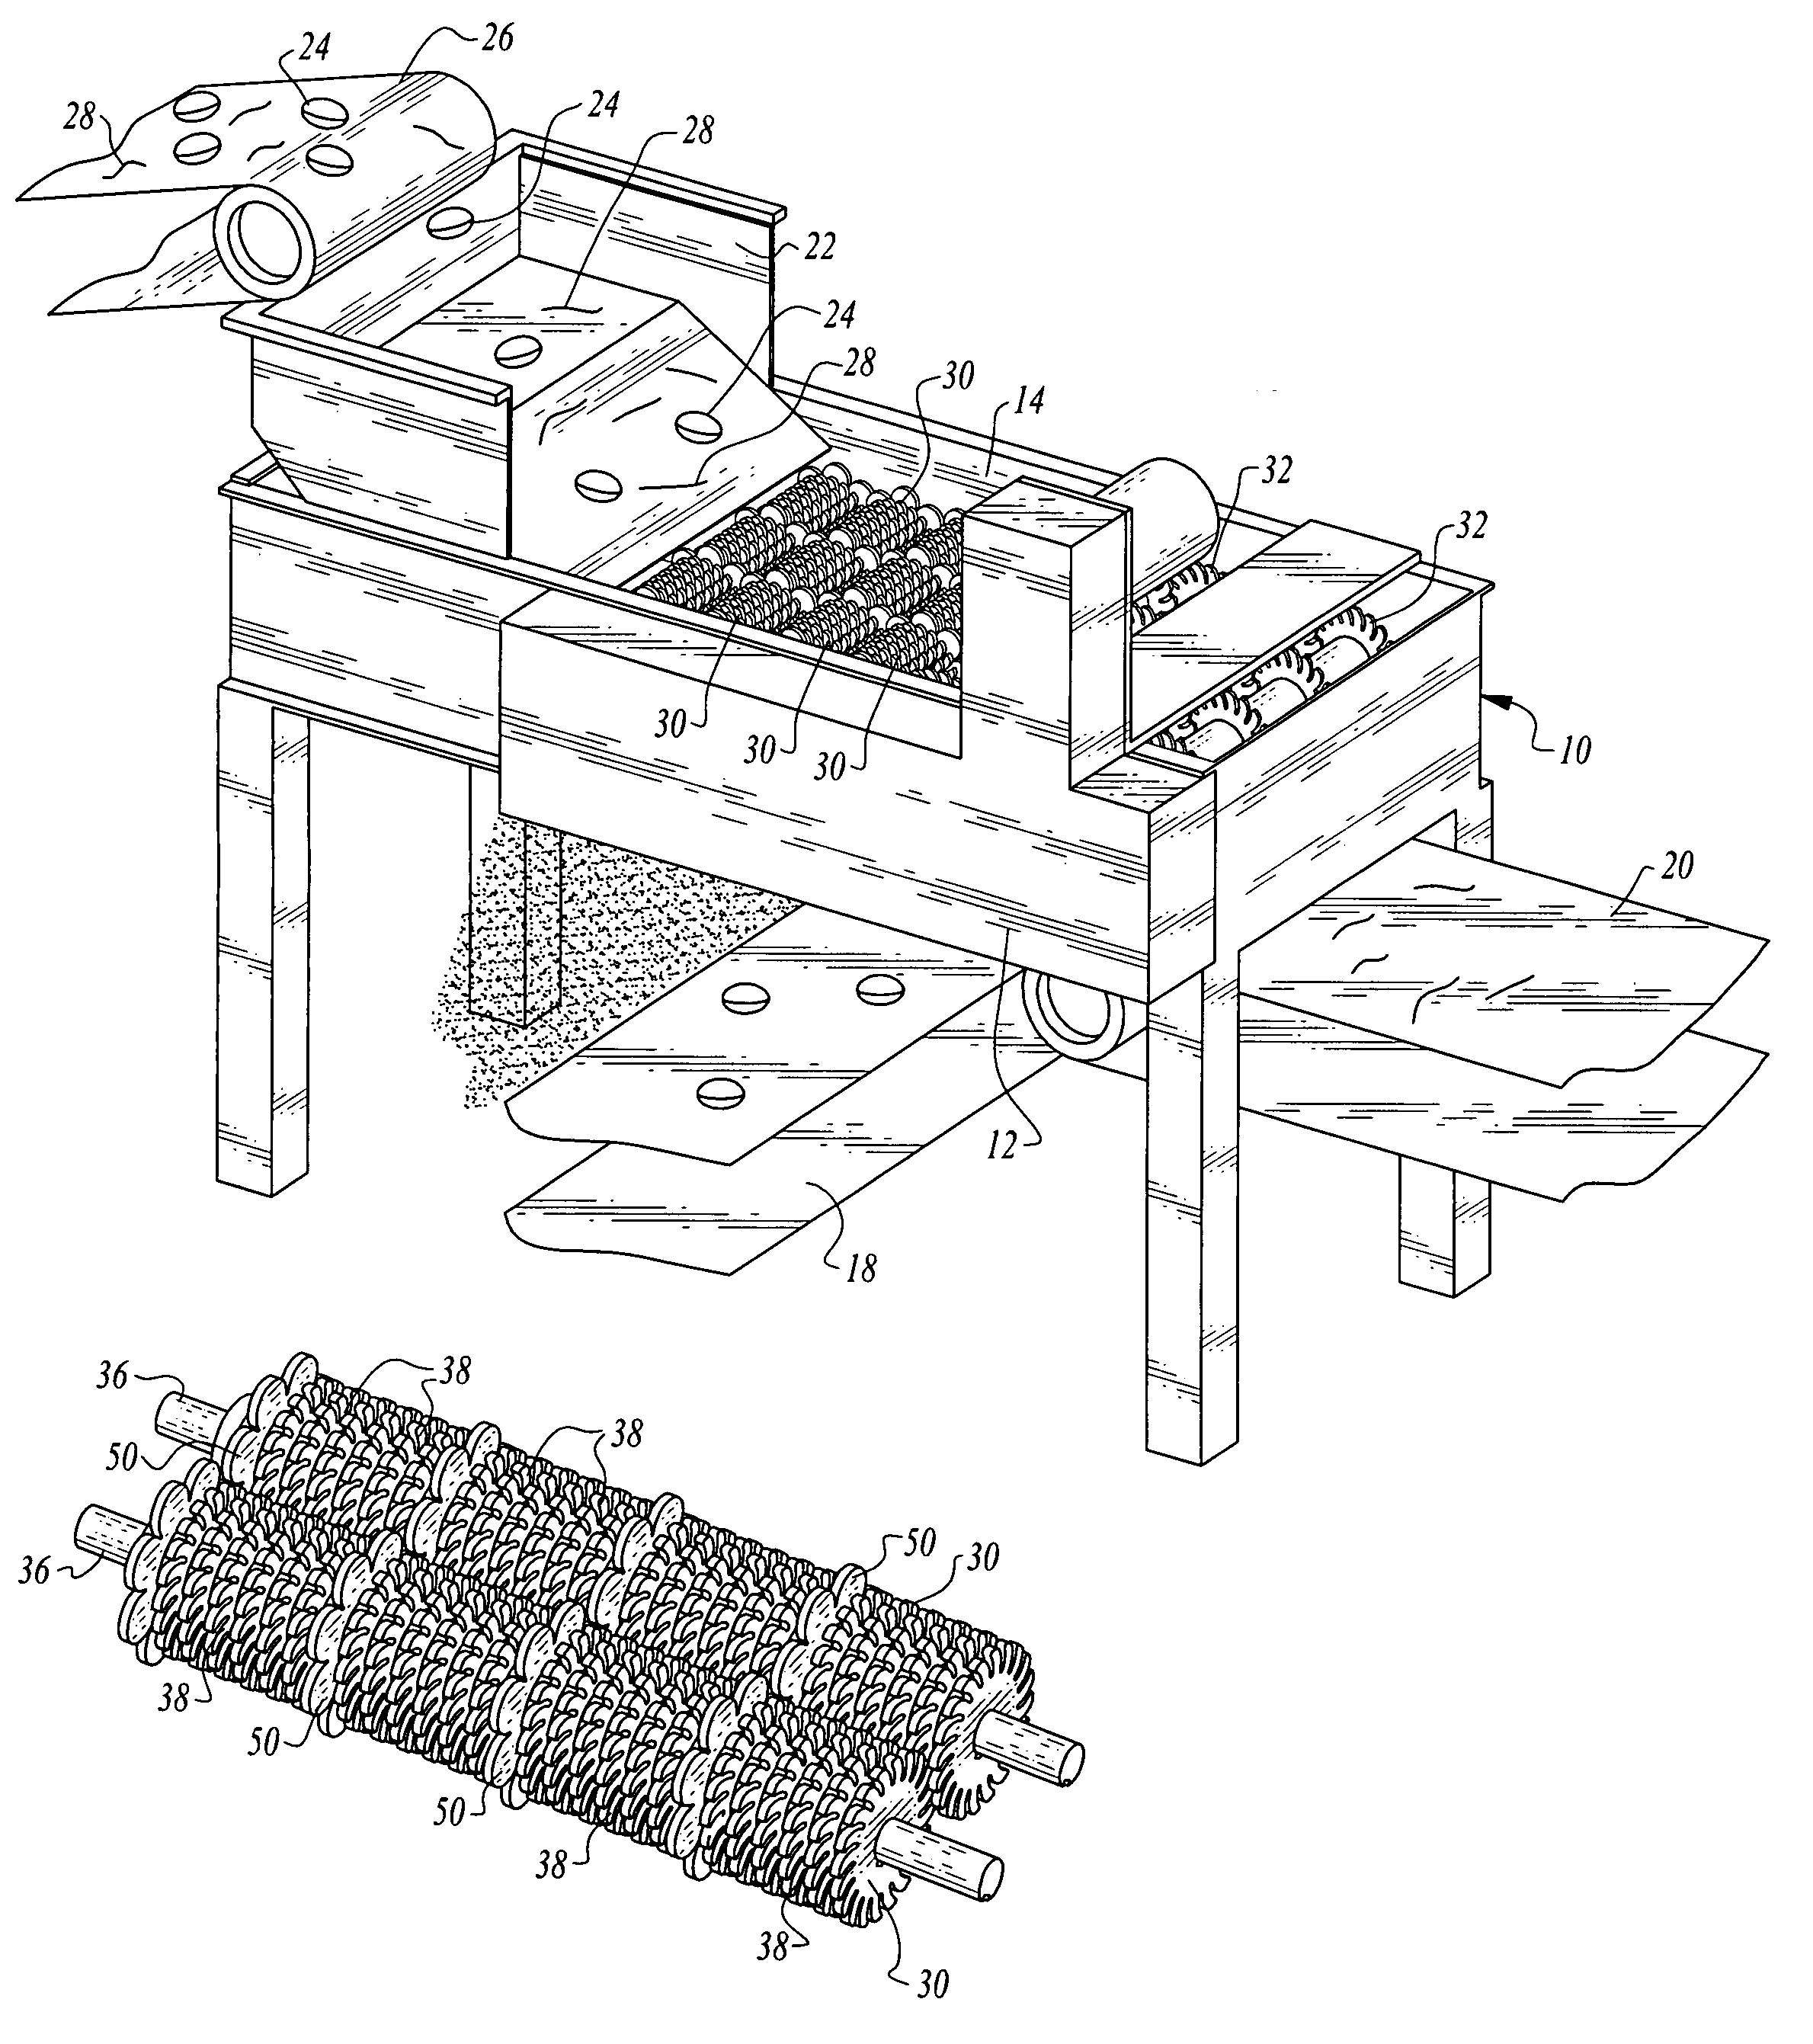 System for removing debris from a harvested tree crop product